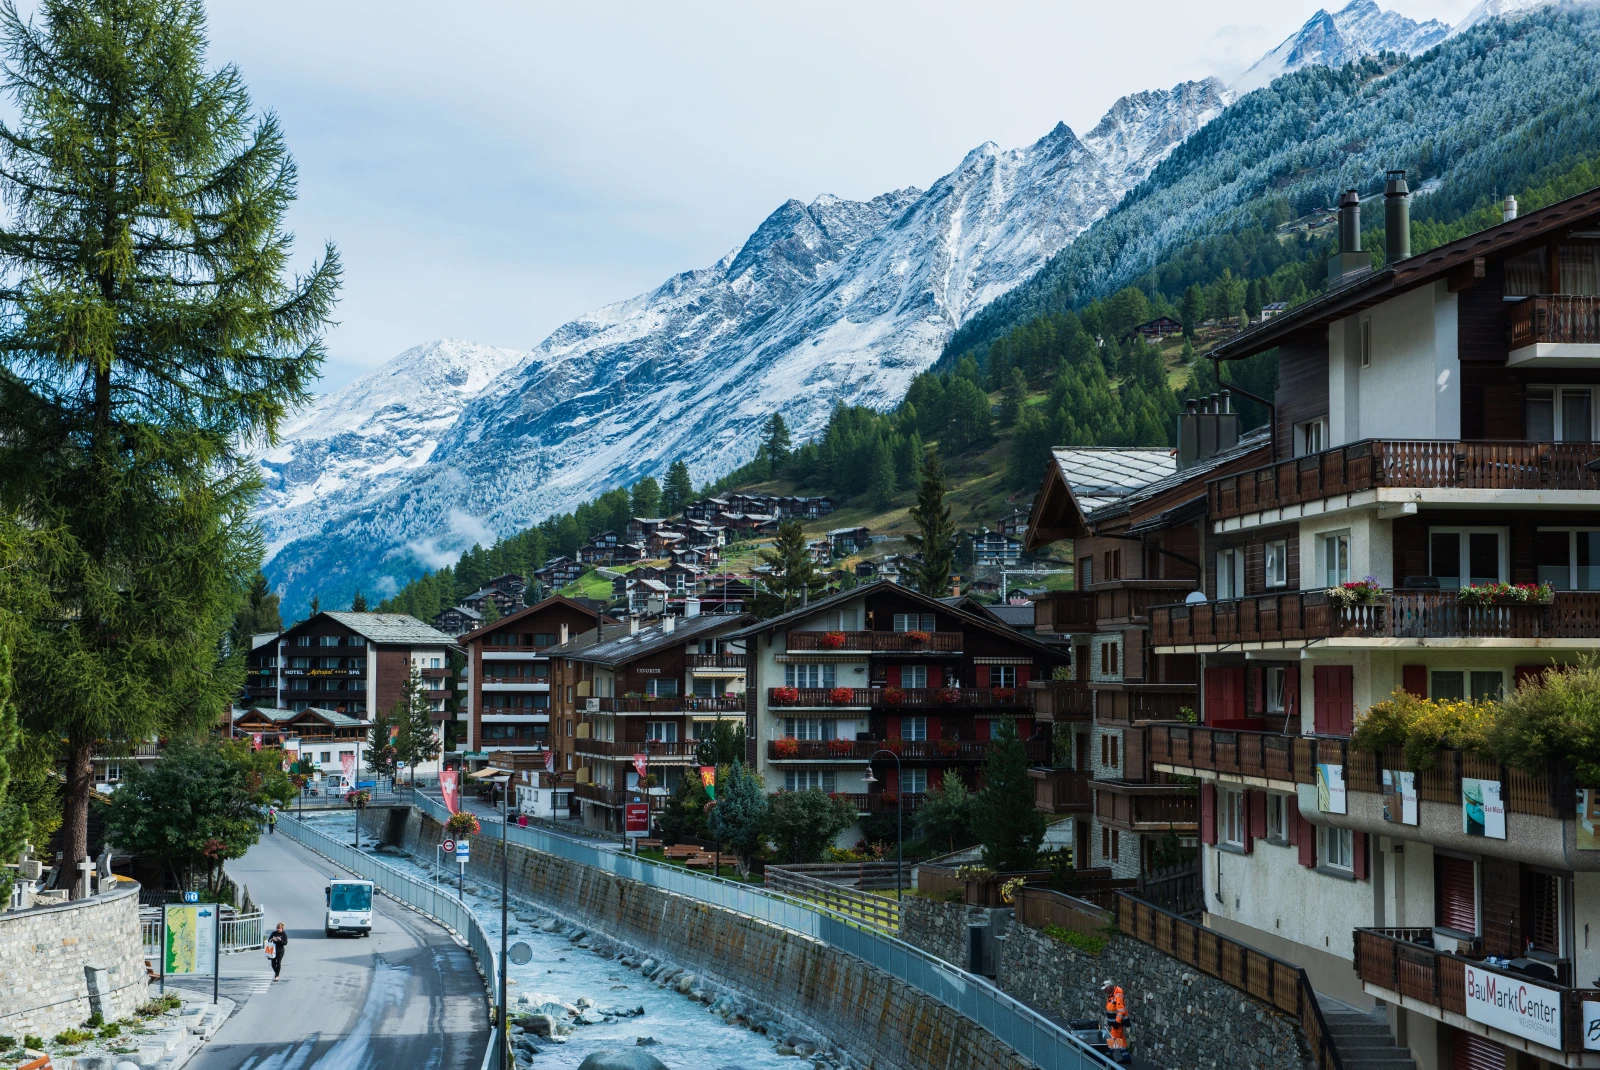 A view of Zermatt with a river and wooden chalets. 